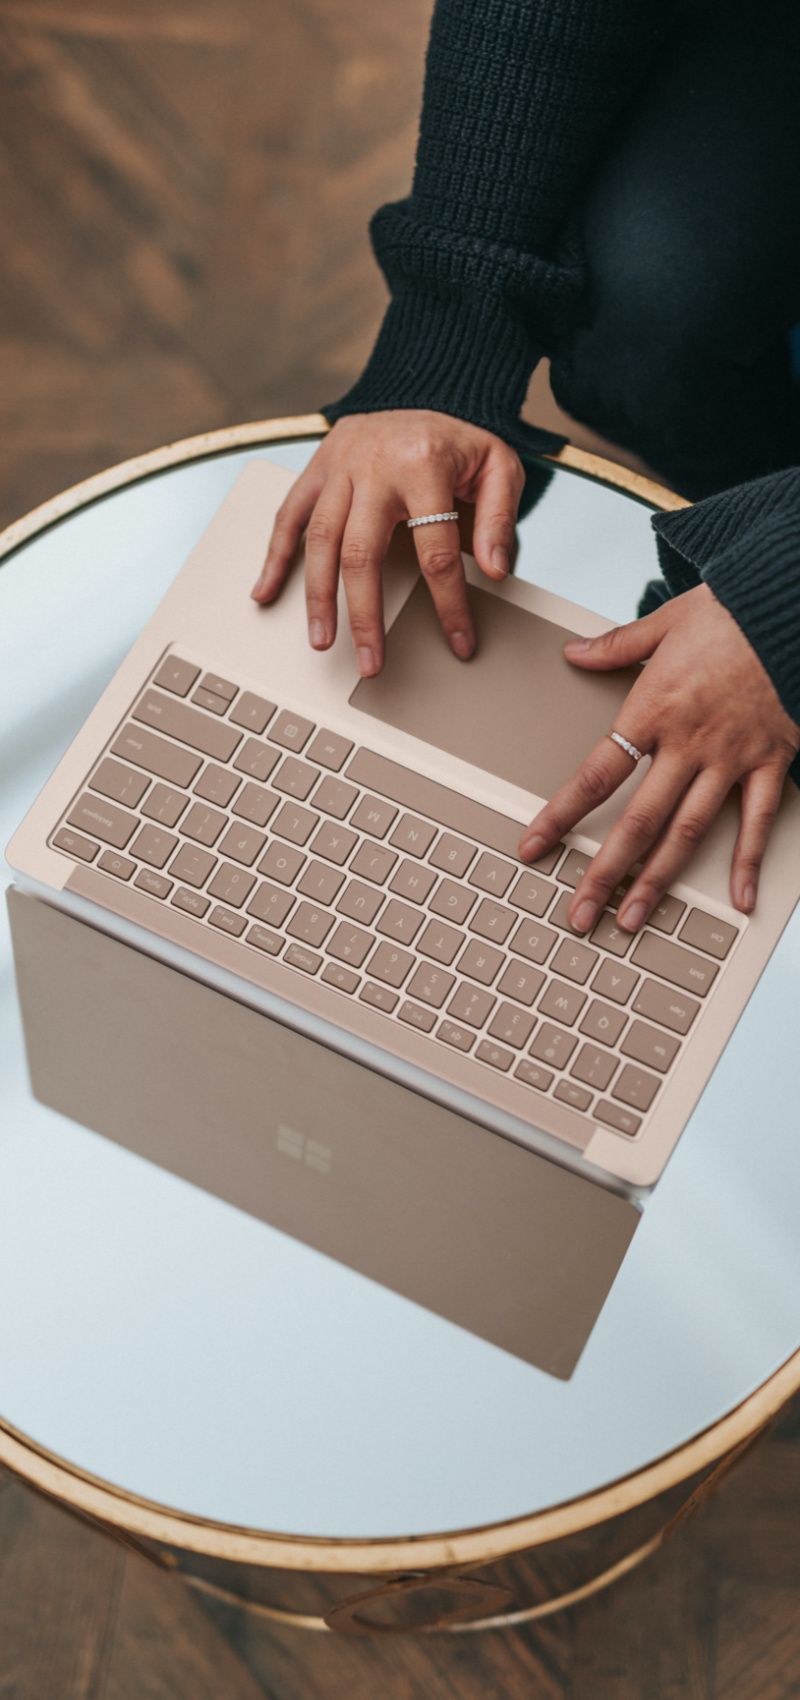 Person working on Surface laptop